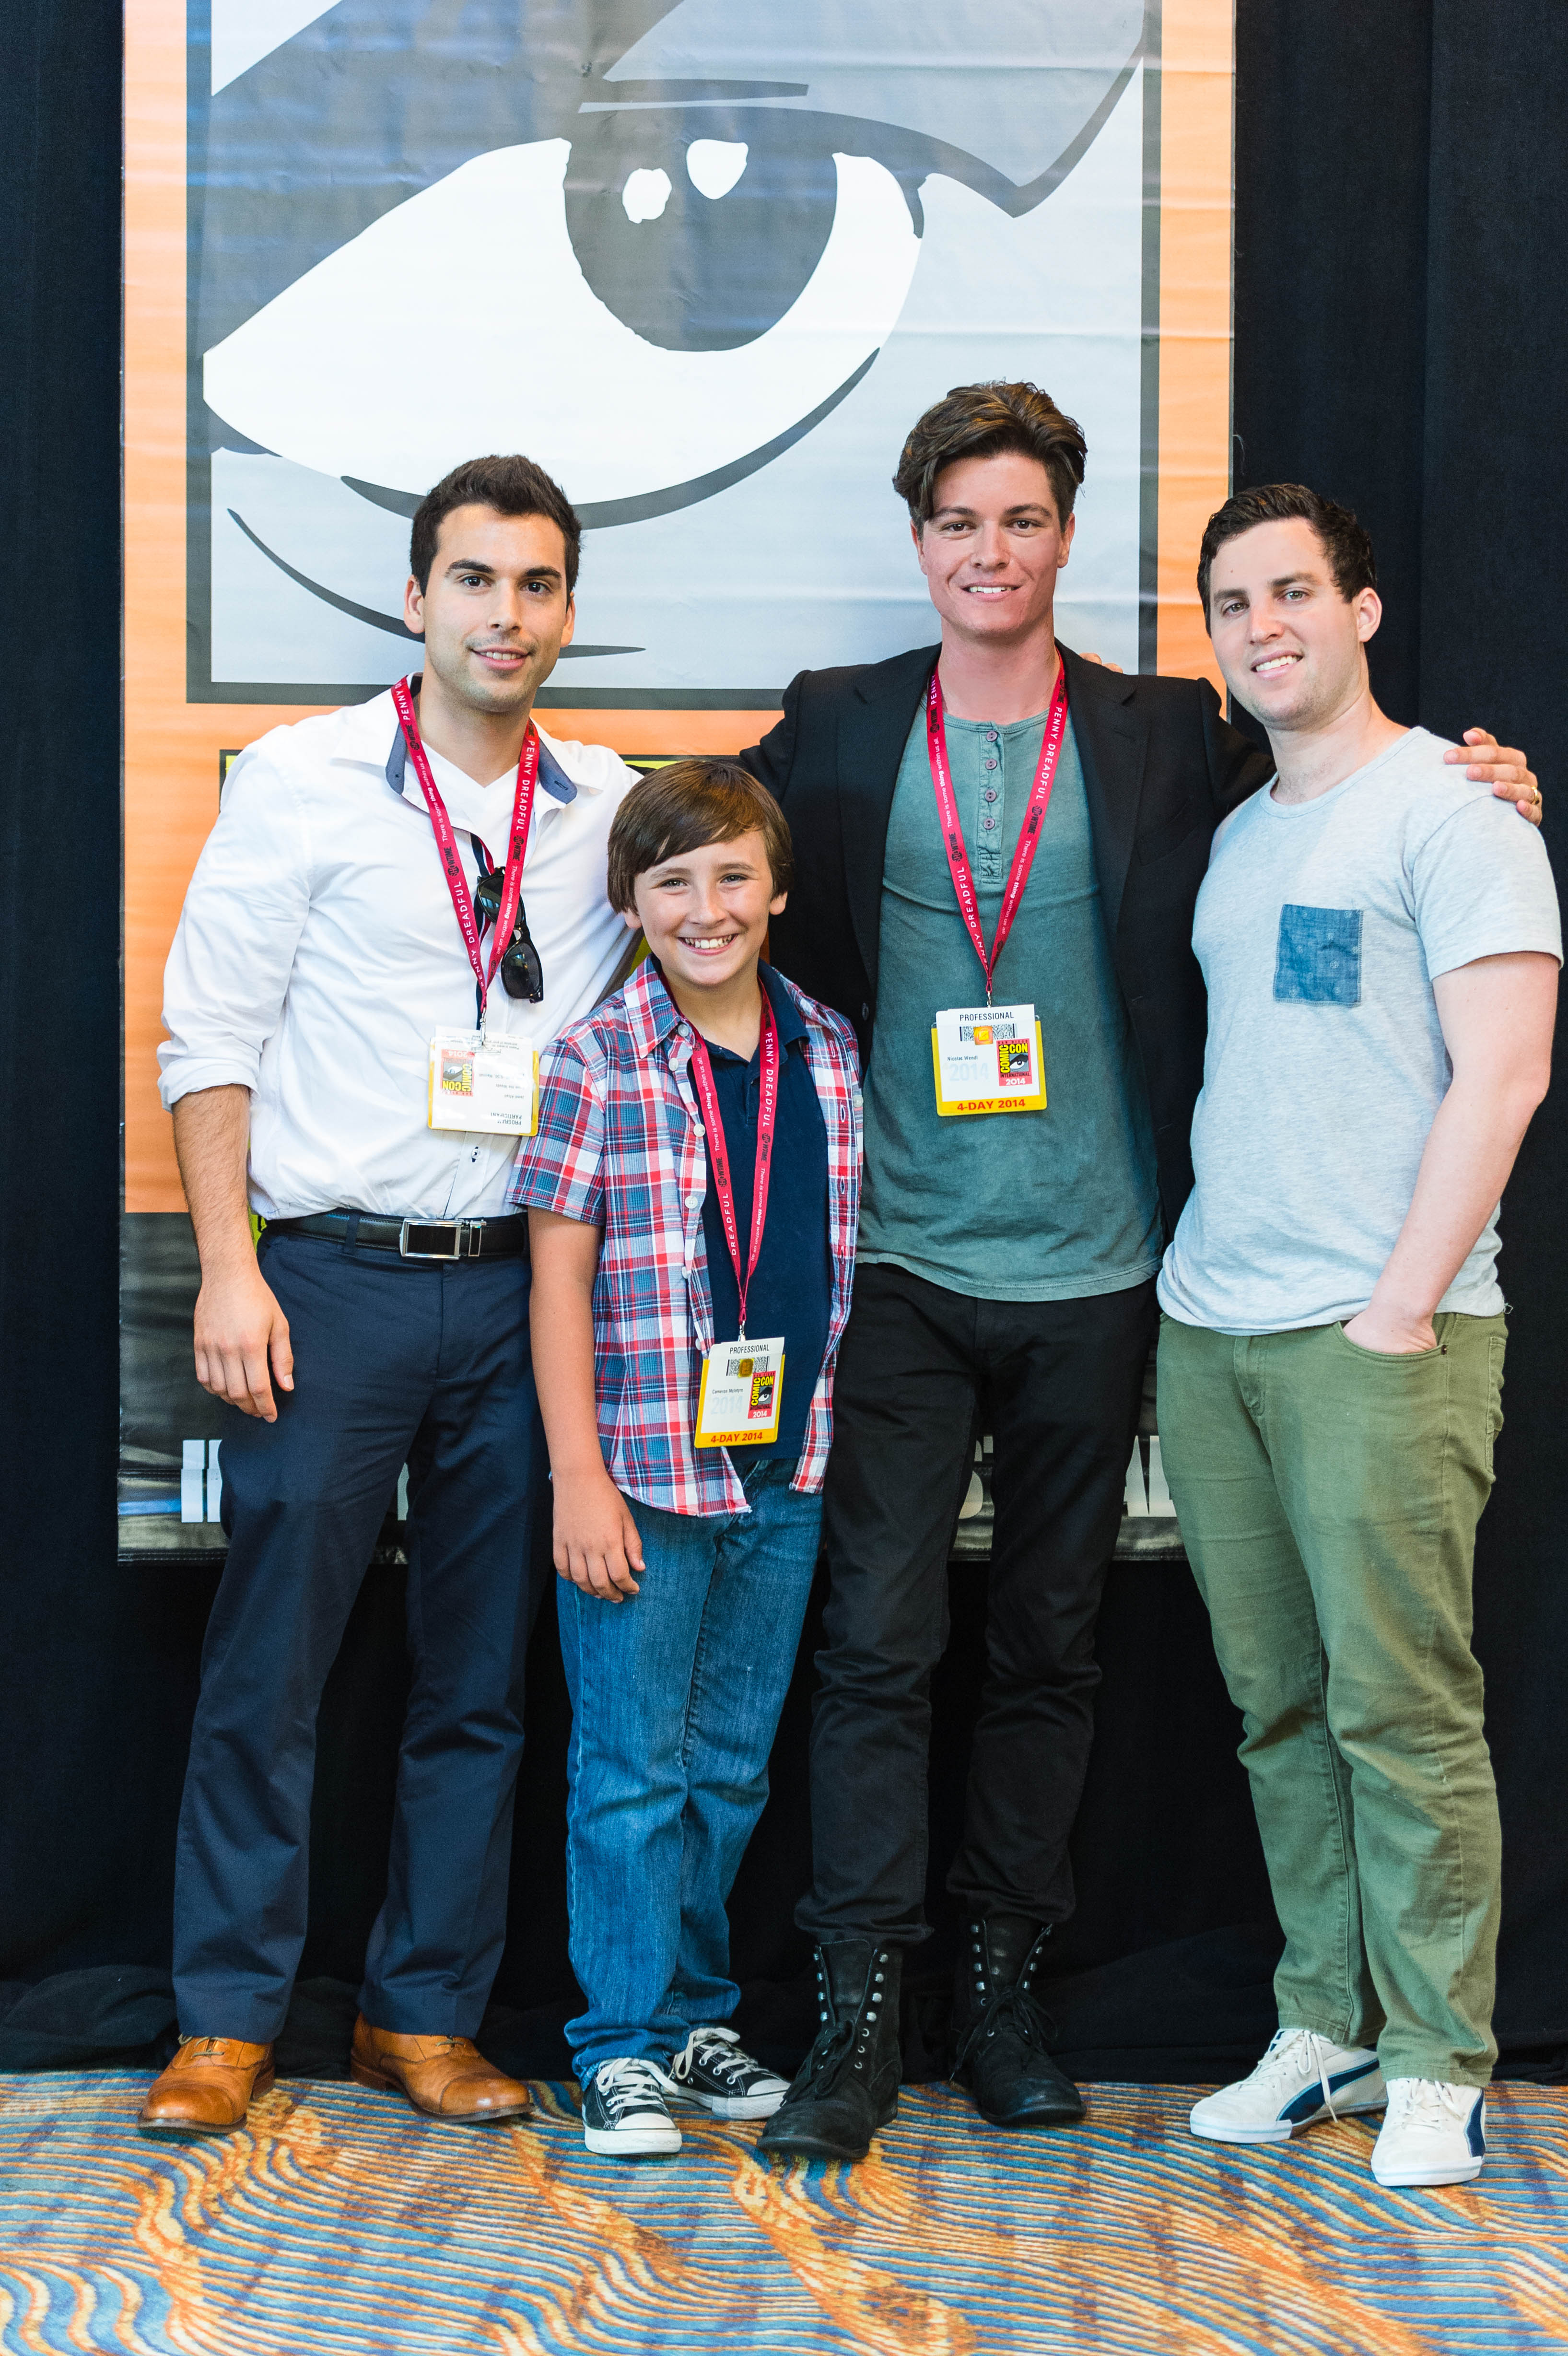 Director Nicolas Wendl, Producer Jamil Afzali, Star Cameron McIntyre and Co-writer Adam Litt at the 'From The Woods' Panel at the San Diego Comic Con International Film Festival 2014